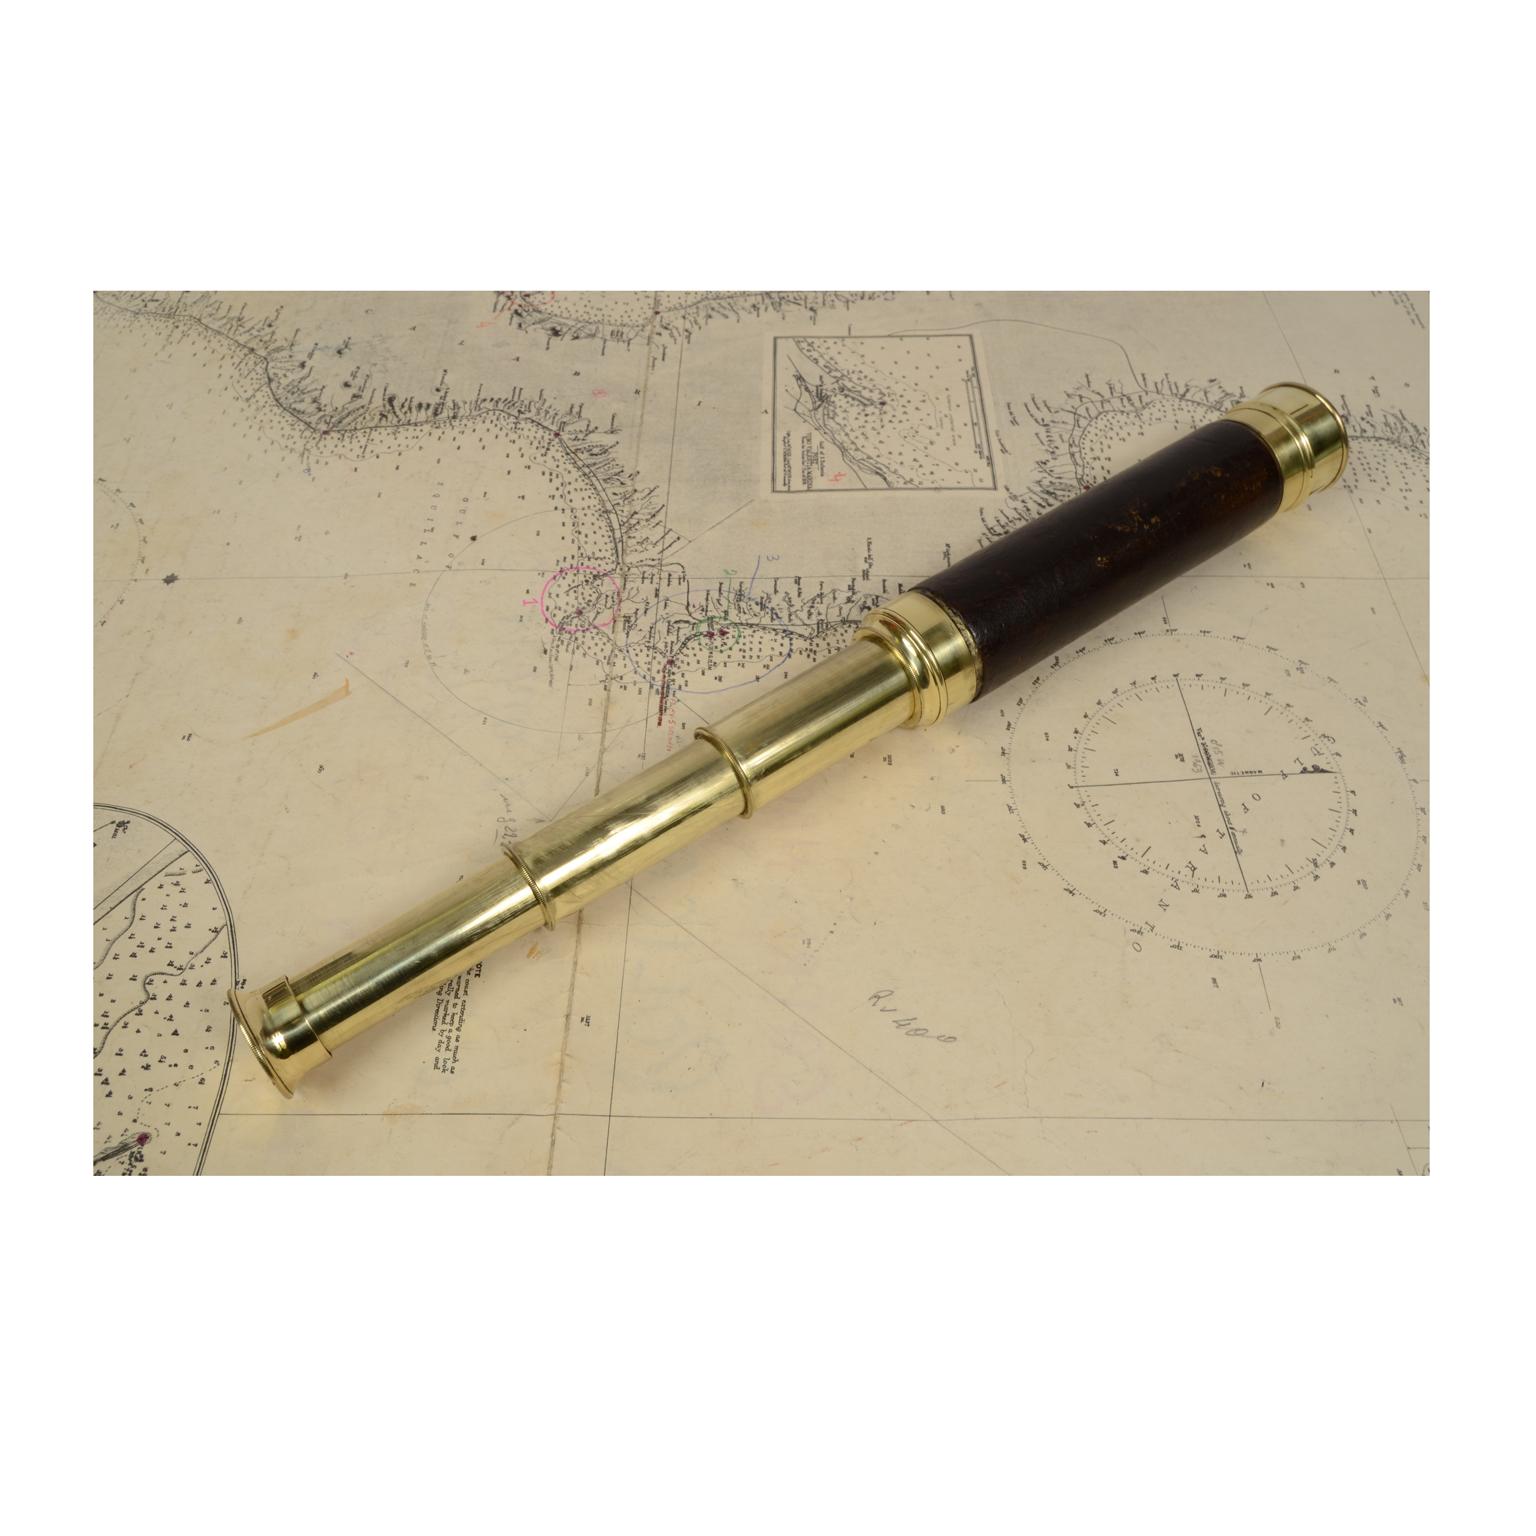 Brass telescope with leather-covered handle, focusing with three extensions. Maximum length 60 cm, minimum 21.5 cm, focal diameter 4 cm. French manufacture from the second half of the 19th century. Excellent condition, fully functional, complete